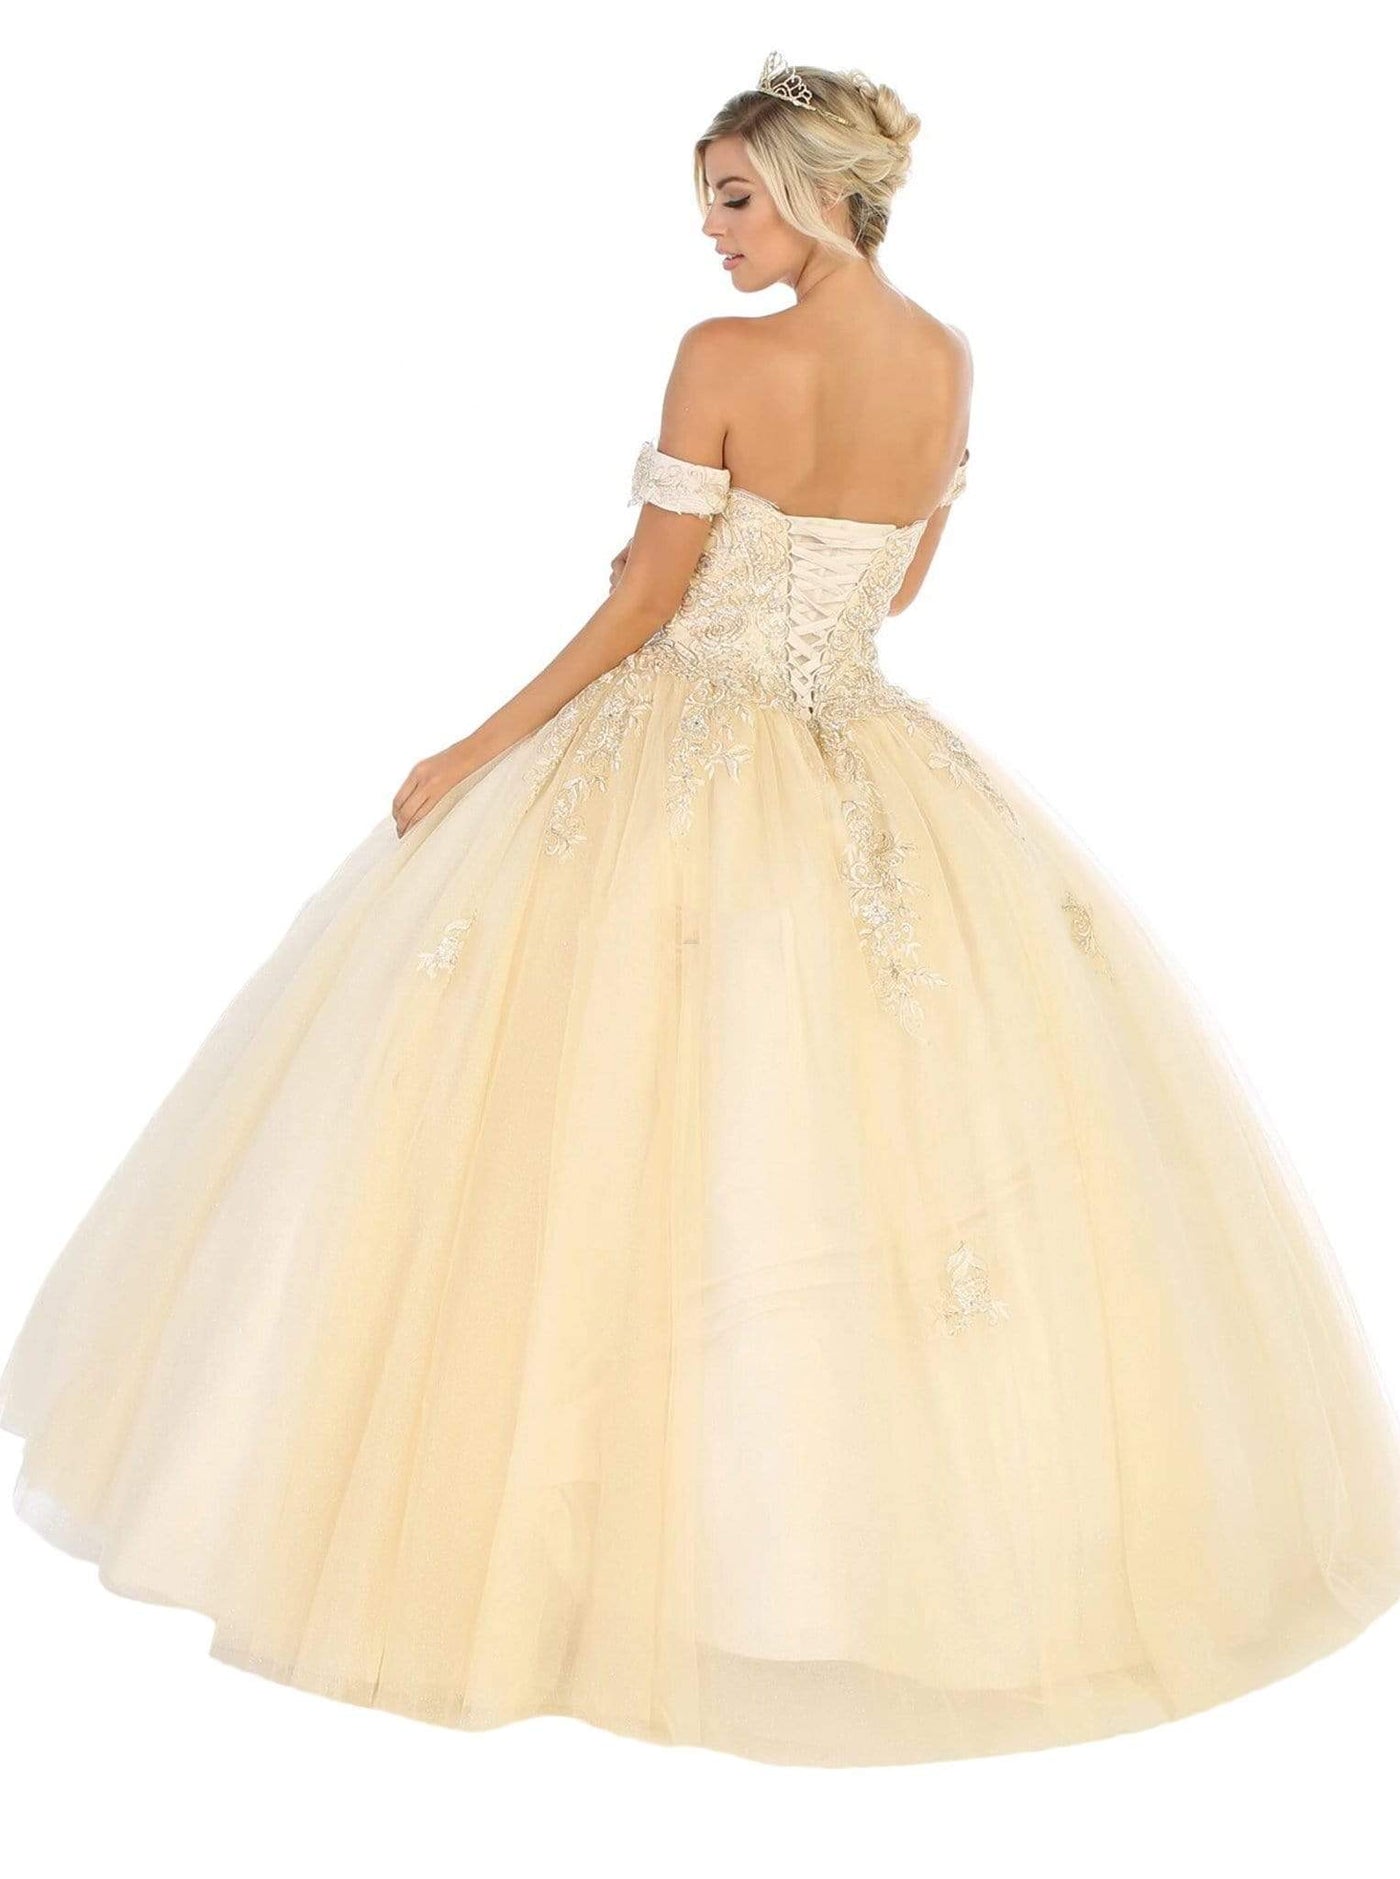 May Queen - LK129 Embellished Sweetheart Ballgown Special Occasion Dress